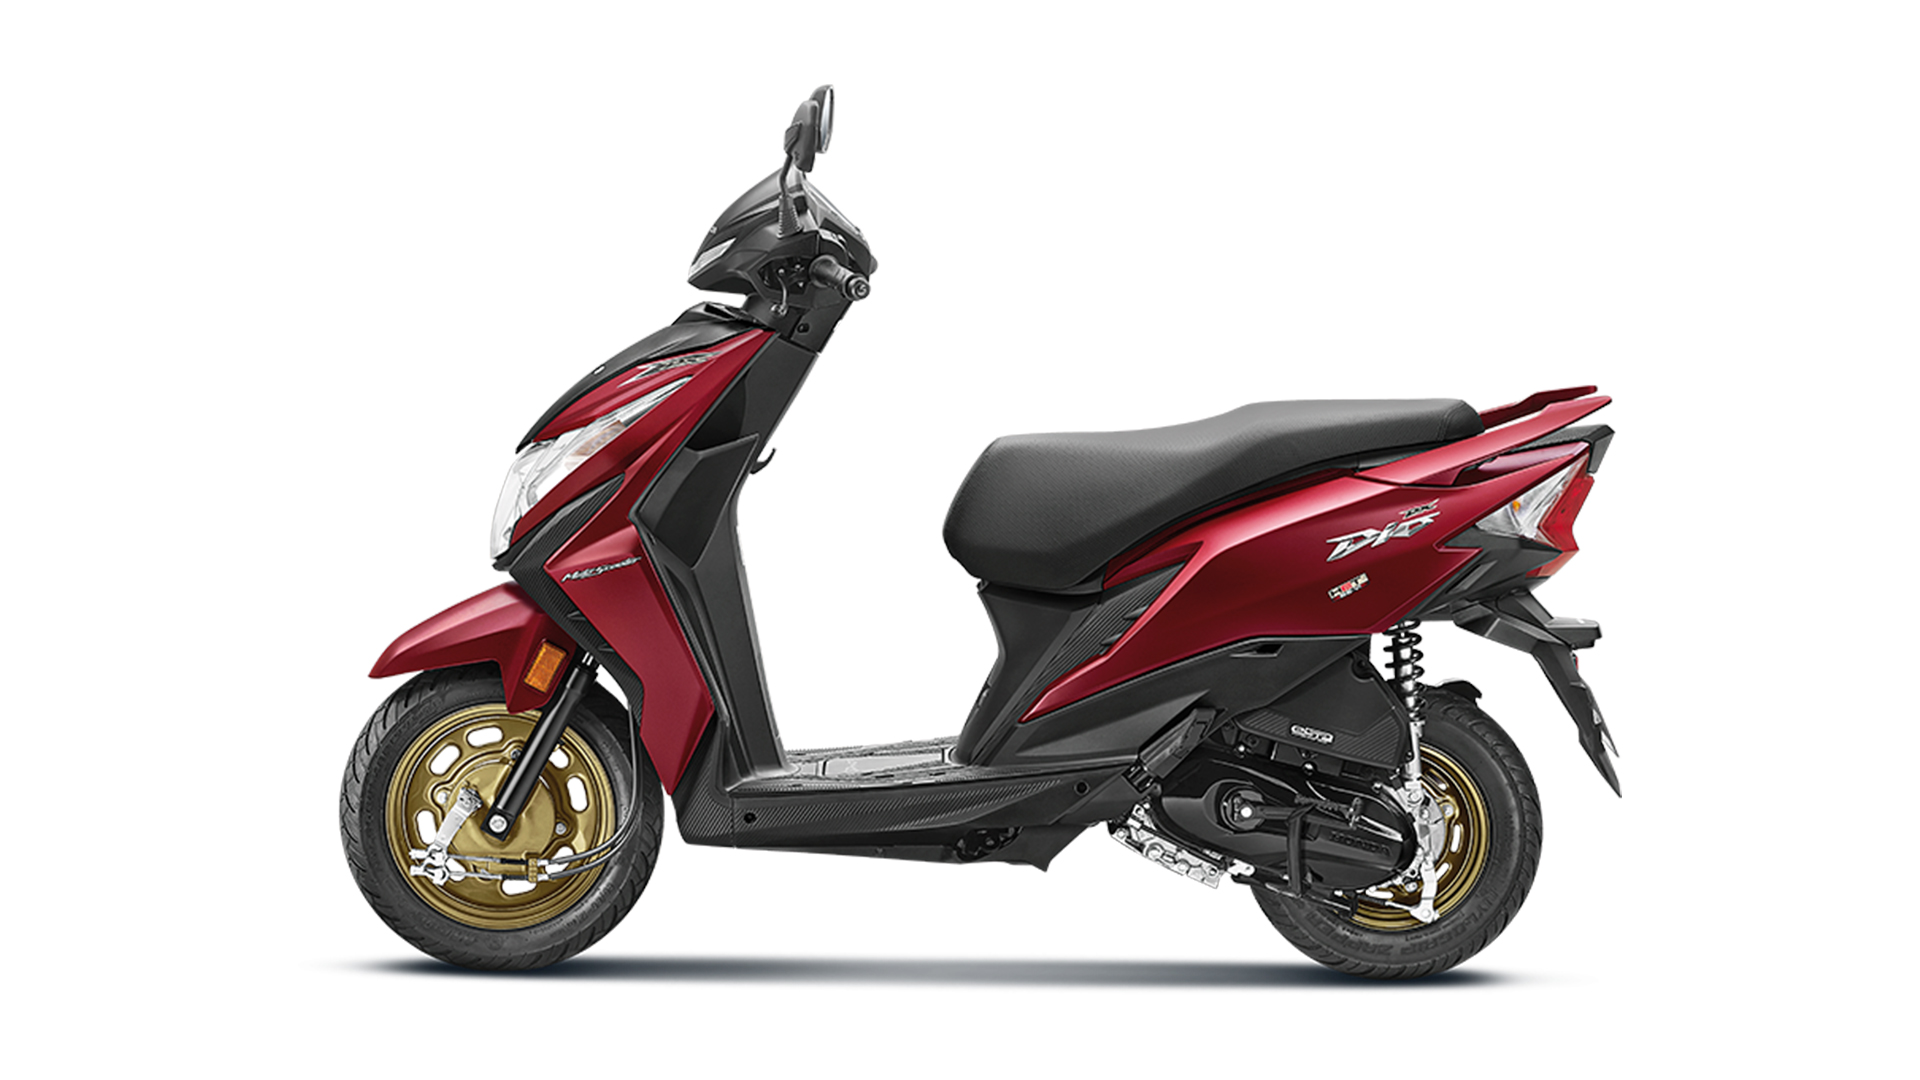 Honda Dio 2020 Dlx Price Mileage Reviews Specification Gallery Overdrive